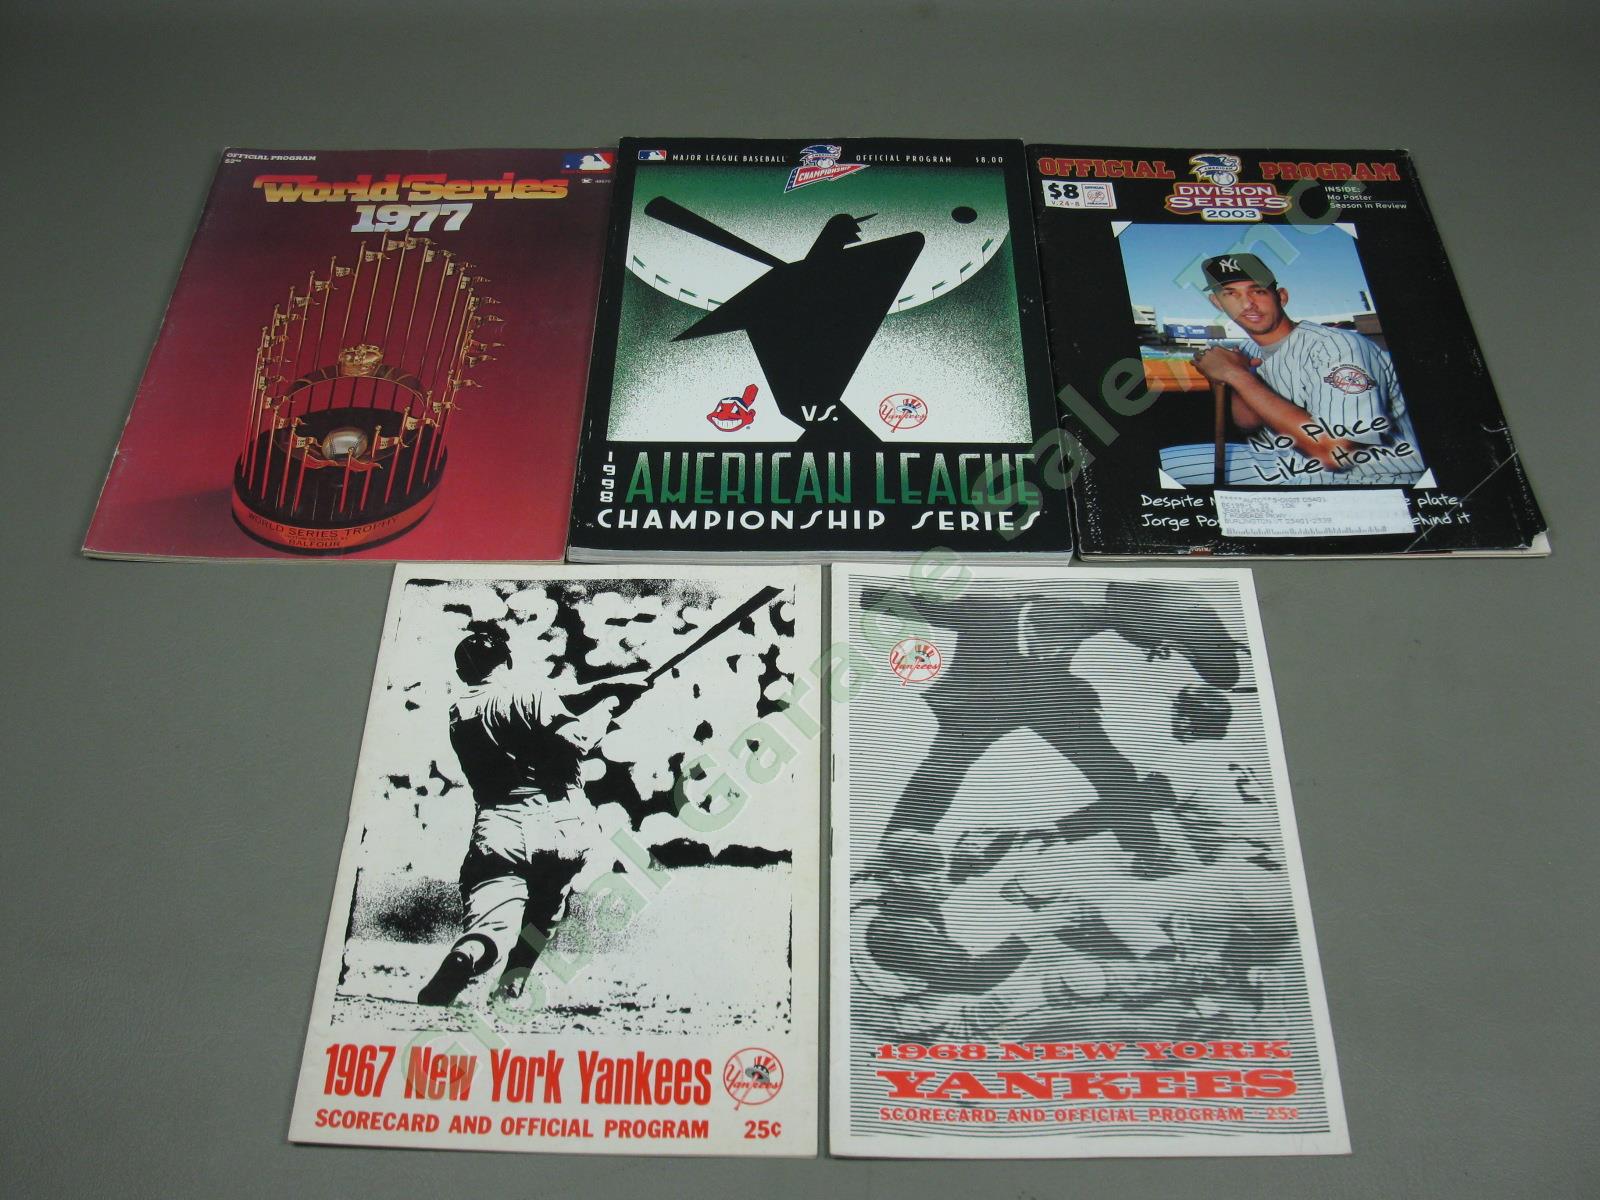 41 NY Yankees Yearbooks Lot Every One From 1967-2007 + 2 Scorecards + 3 Programs 1